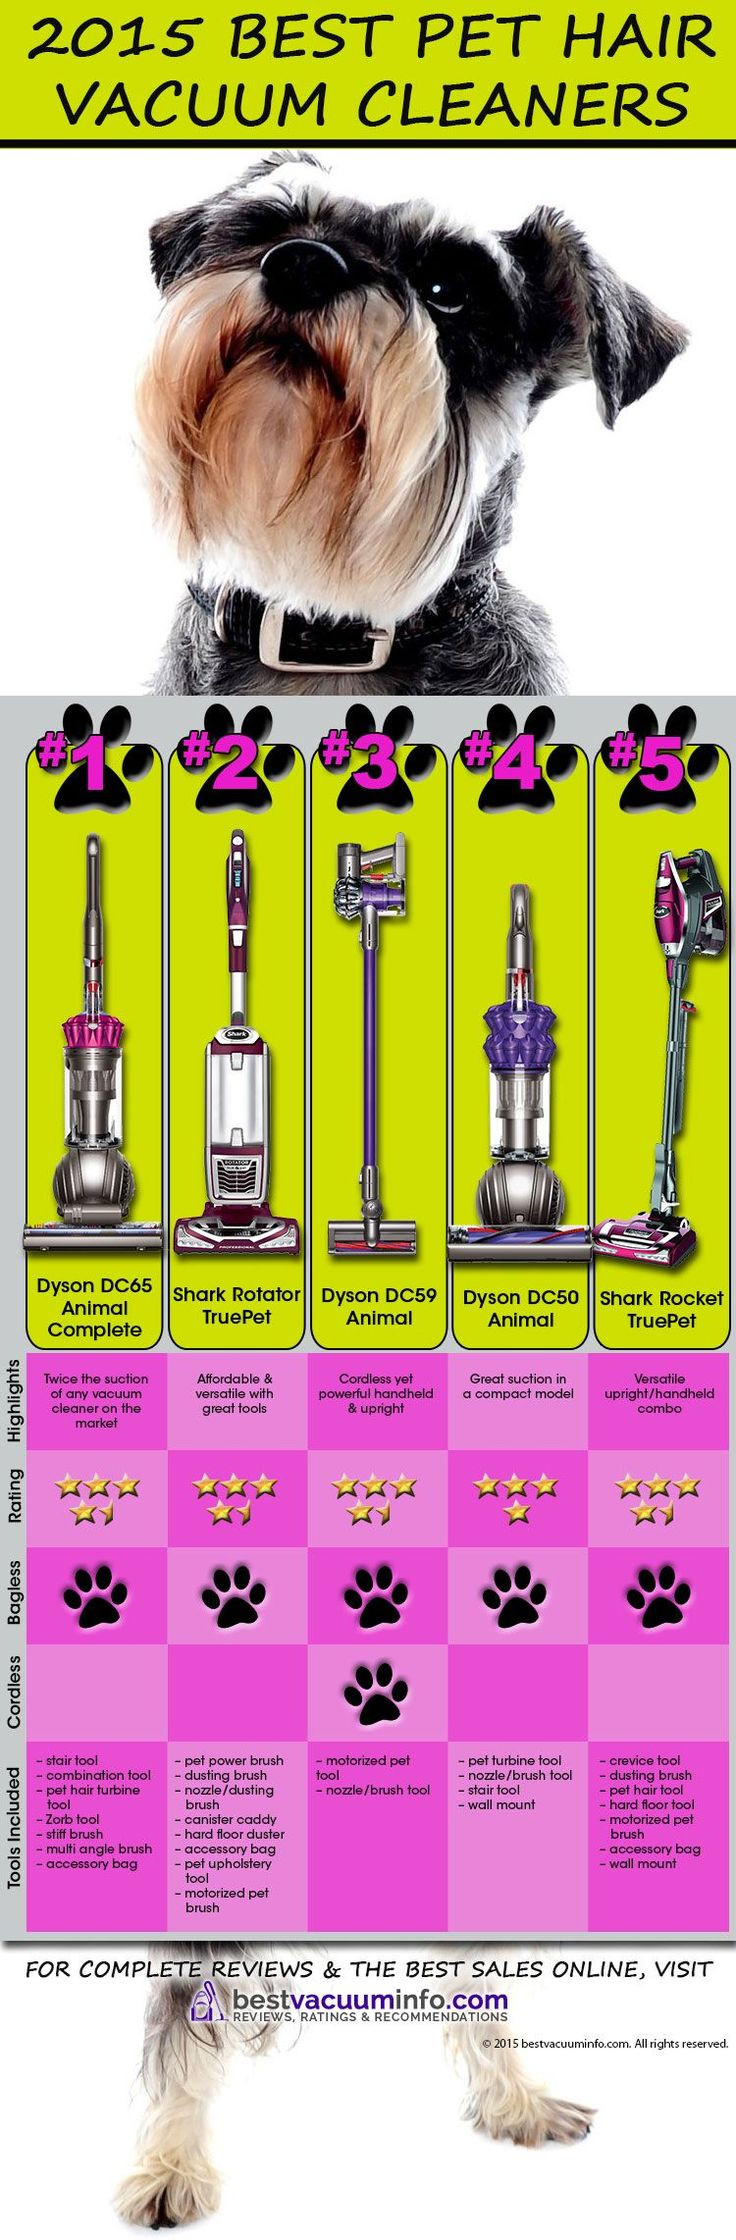 14 Fashionable Hardwood Floor Vacuum Reviews 2017 2024 free download hardwood floor vacuum reviews 2017 of 7 best vacuum reviews images on pinterest vacuum cleaners vacuums inside best vacuums for pet hair 2015 infographic see reviews of all the best pet hair